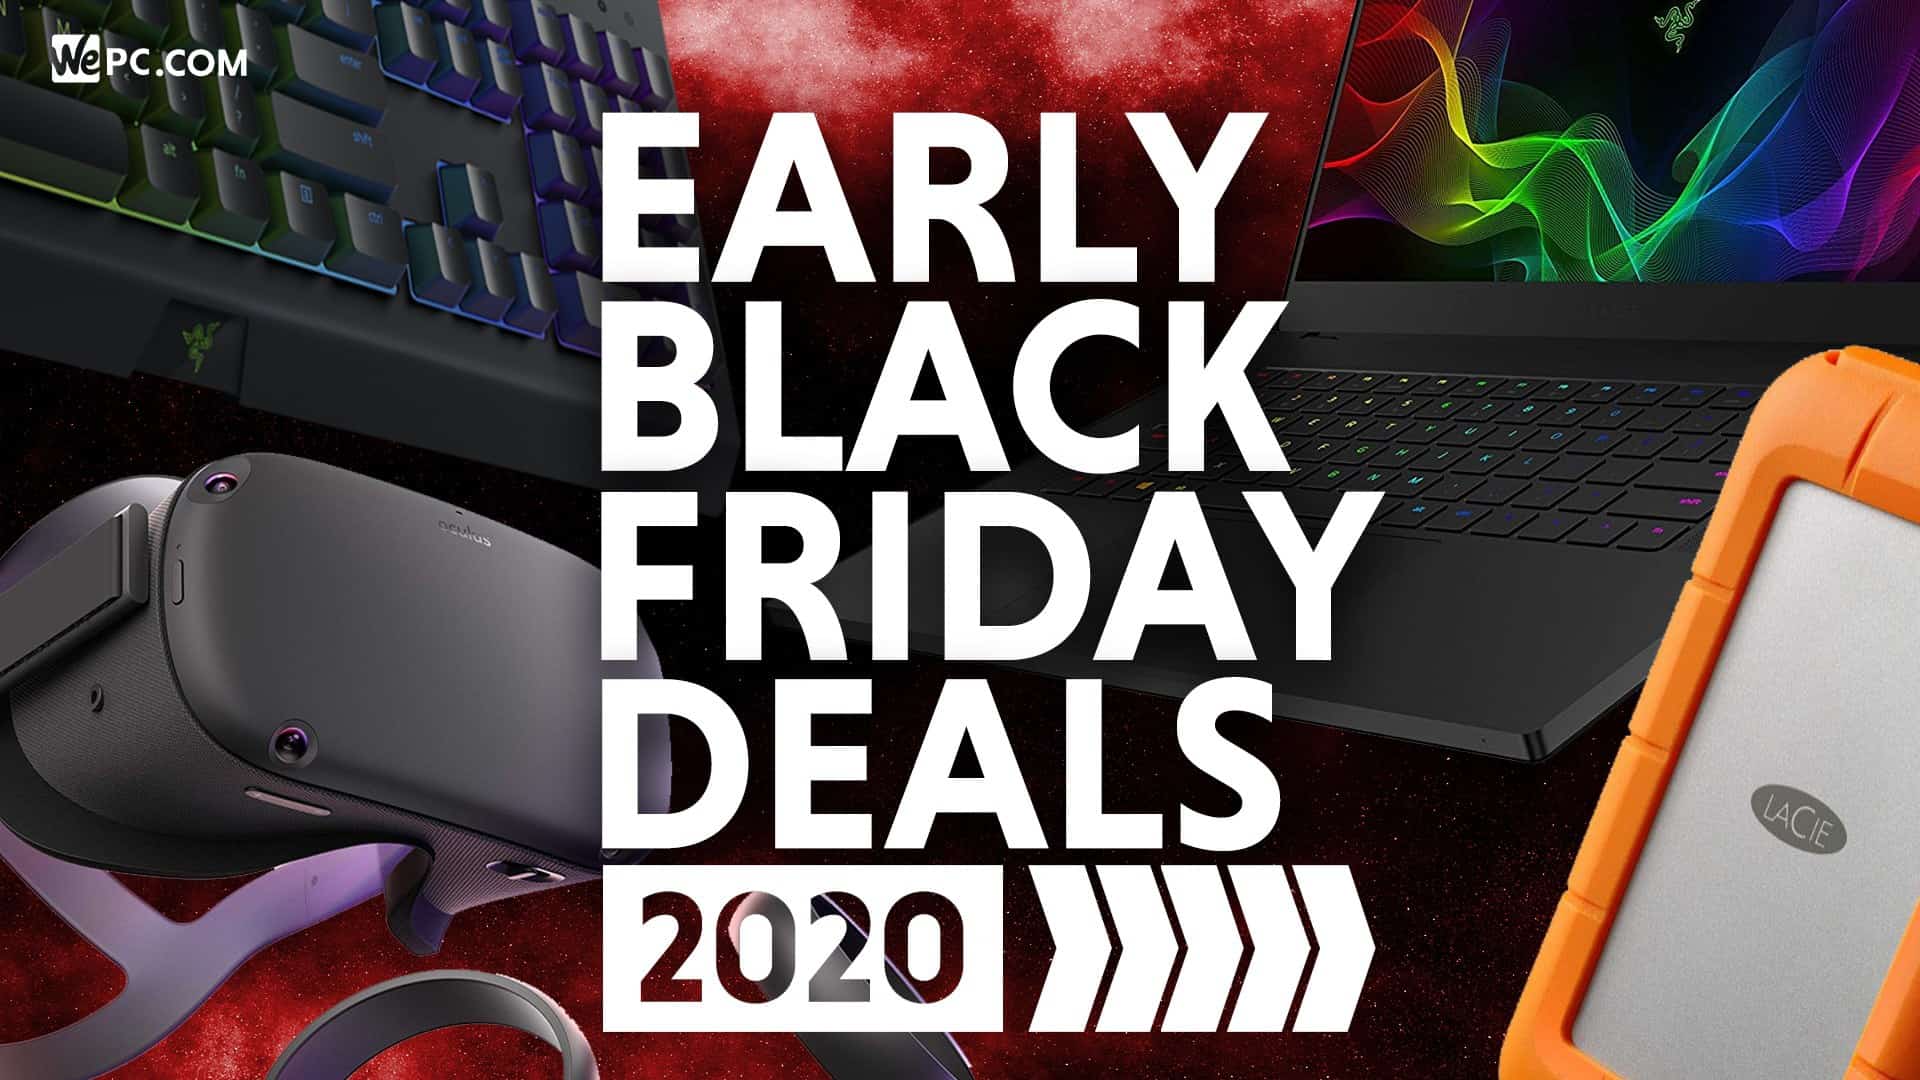 Early Black Friday Deals Are Already Going Live - See What's Already On - What Black Fridays Deals Online Have Stared